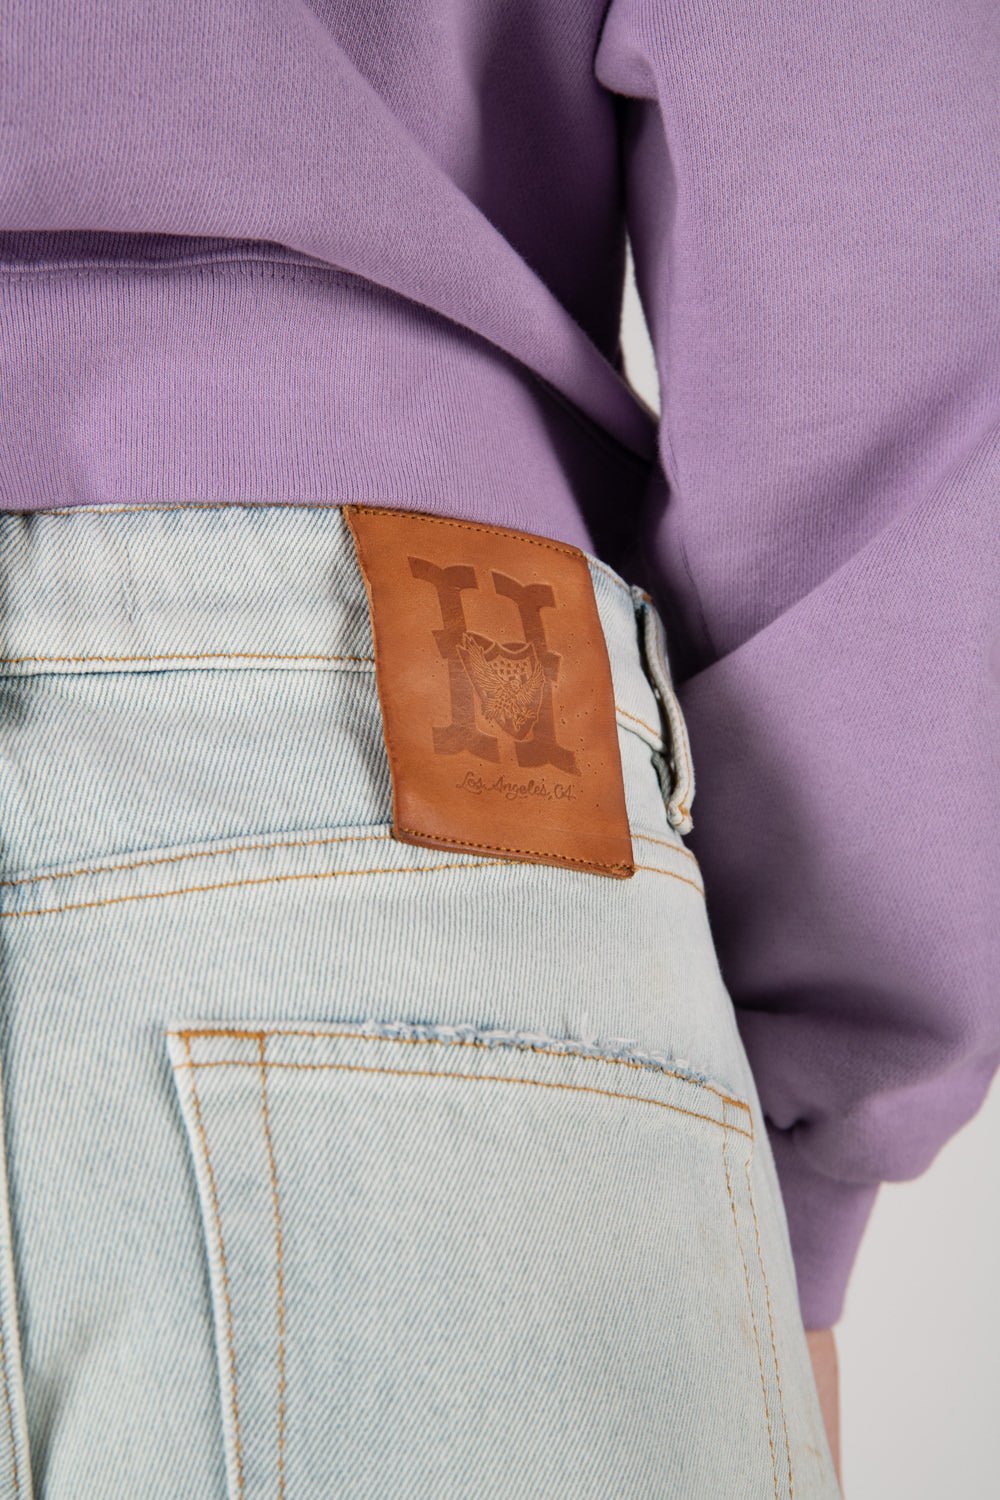 VICTORIA Regular fit jeans with front button and zip closure. Back leather logo patch. Stonewashed coloring may vary. Five pockets. Composition: 100% Cotton HTC LOS ANGELES